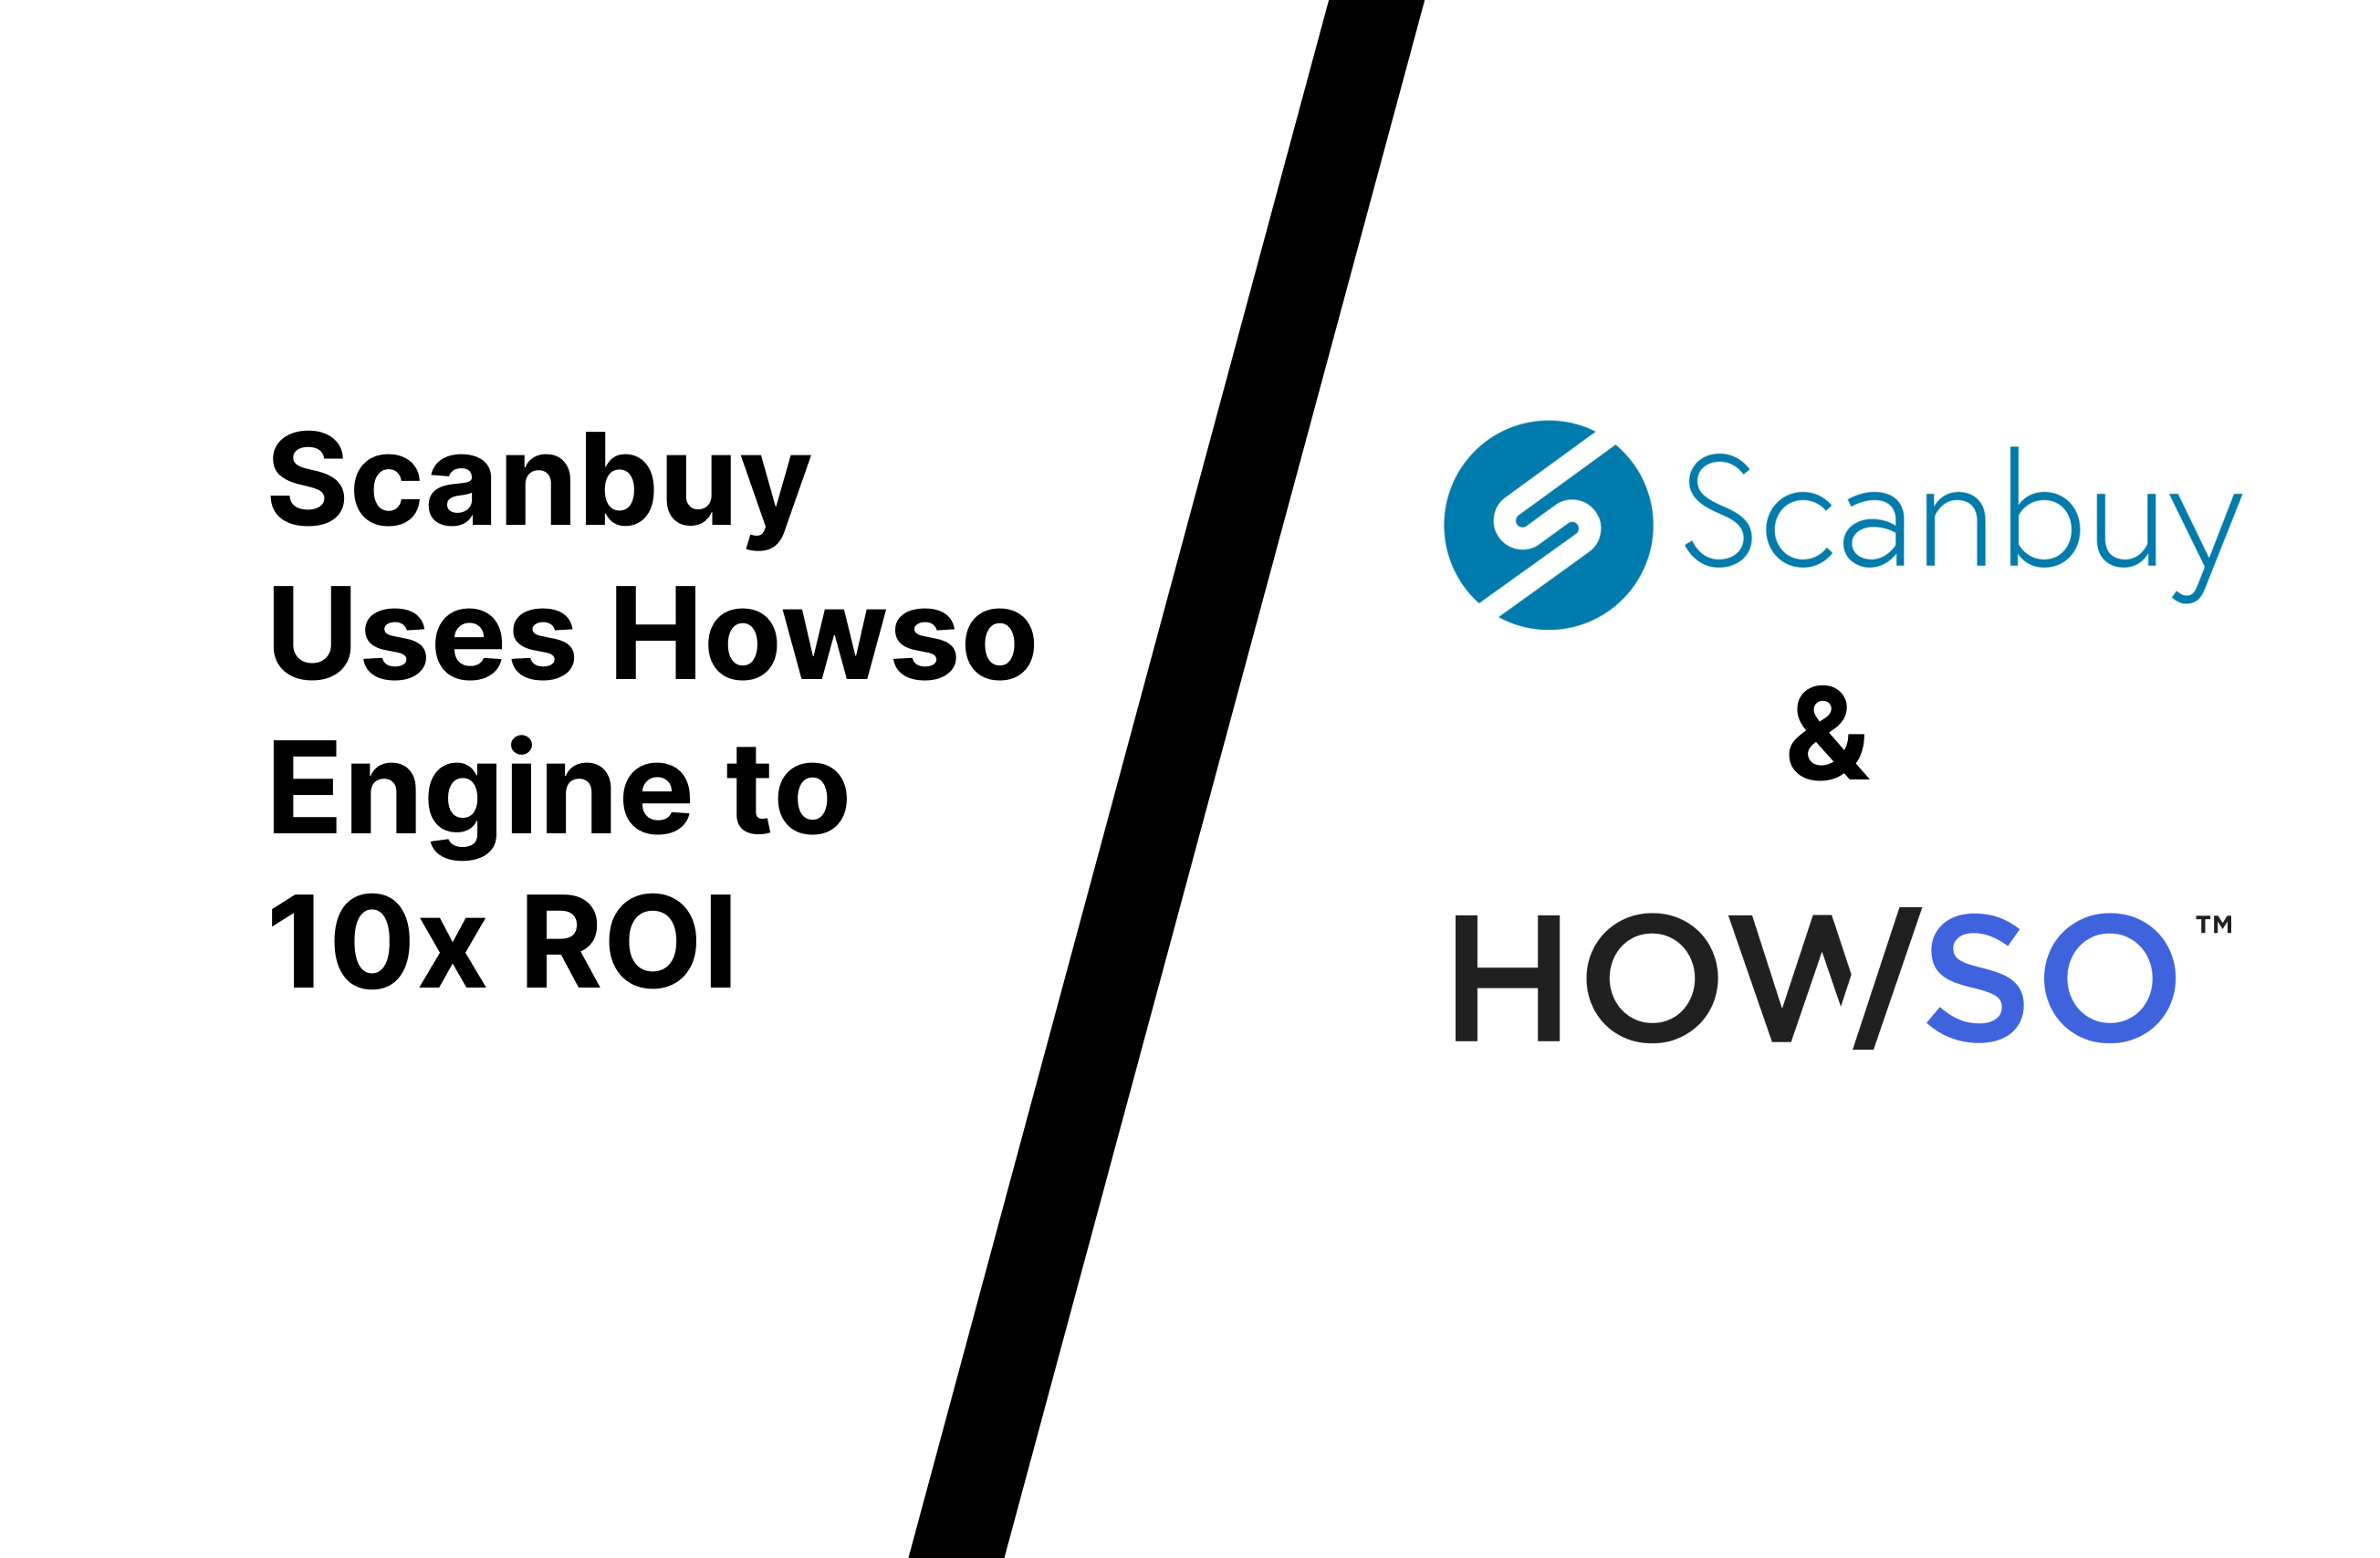 Scanbuy Uses Howso Engine to 10x ROI for CPG Brand Advertising